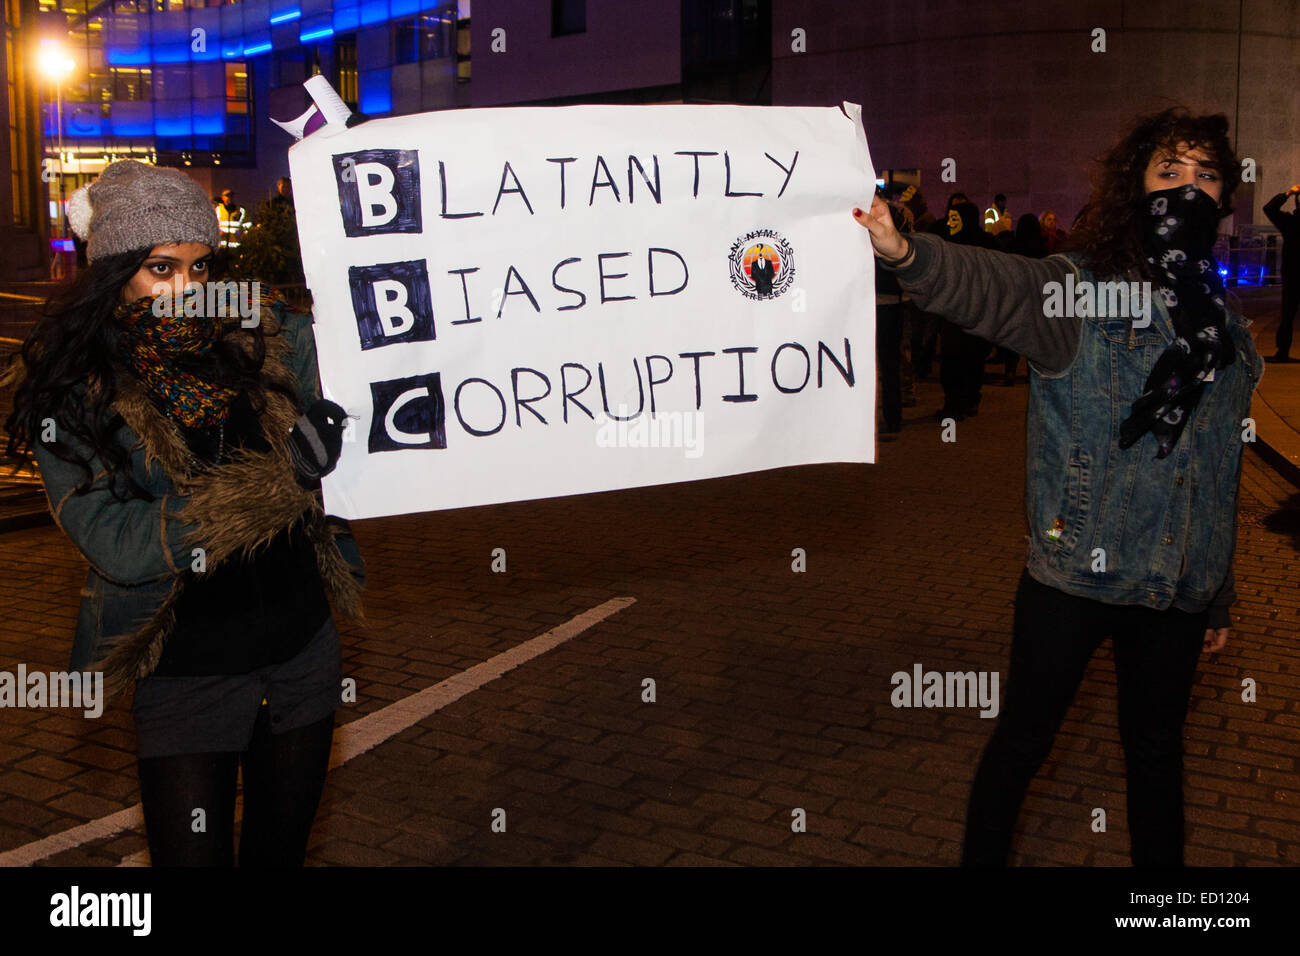 London, UK. 23rd Dec, 2014. Online activism group Anonymous march through London from the City to the BBC's HQ on Great Portland Street in protest against alleged biases and coverups of a 'paedophile ring'. PICTURED: Two young women parade a banner for the 'Blatantly Biased Corruption'. Credit:  Paul Davey/Alamy Live News Stock Photo